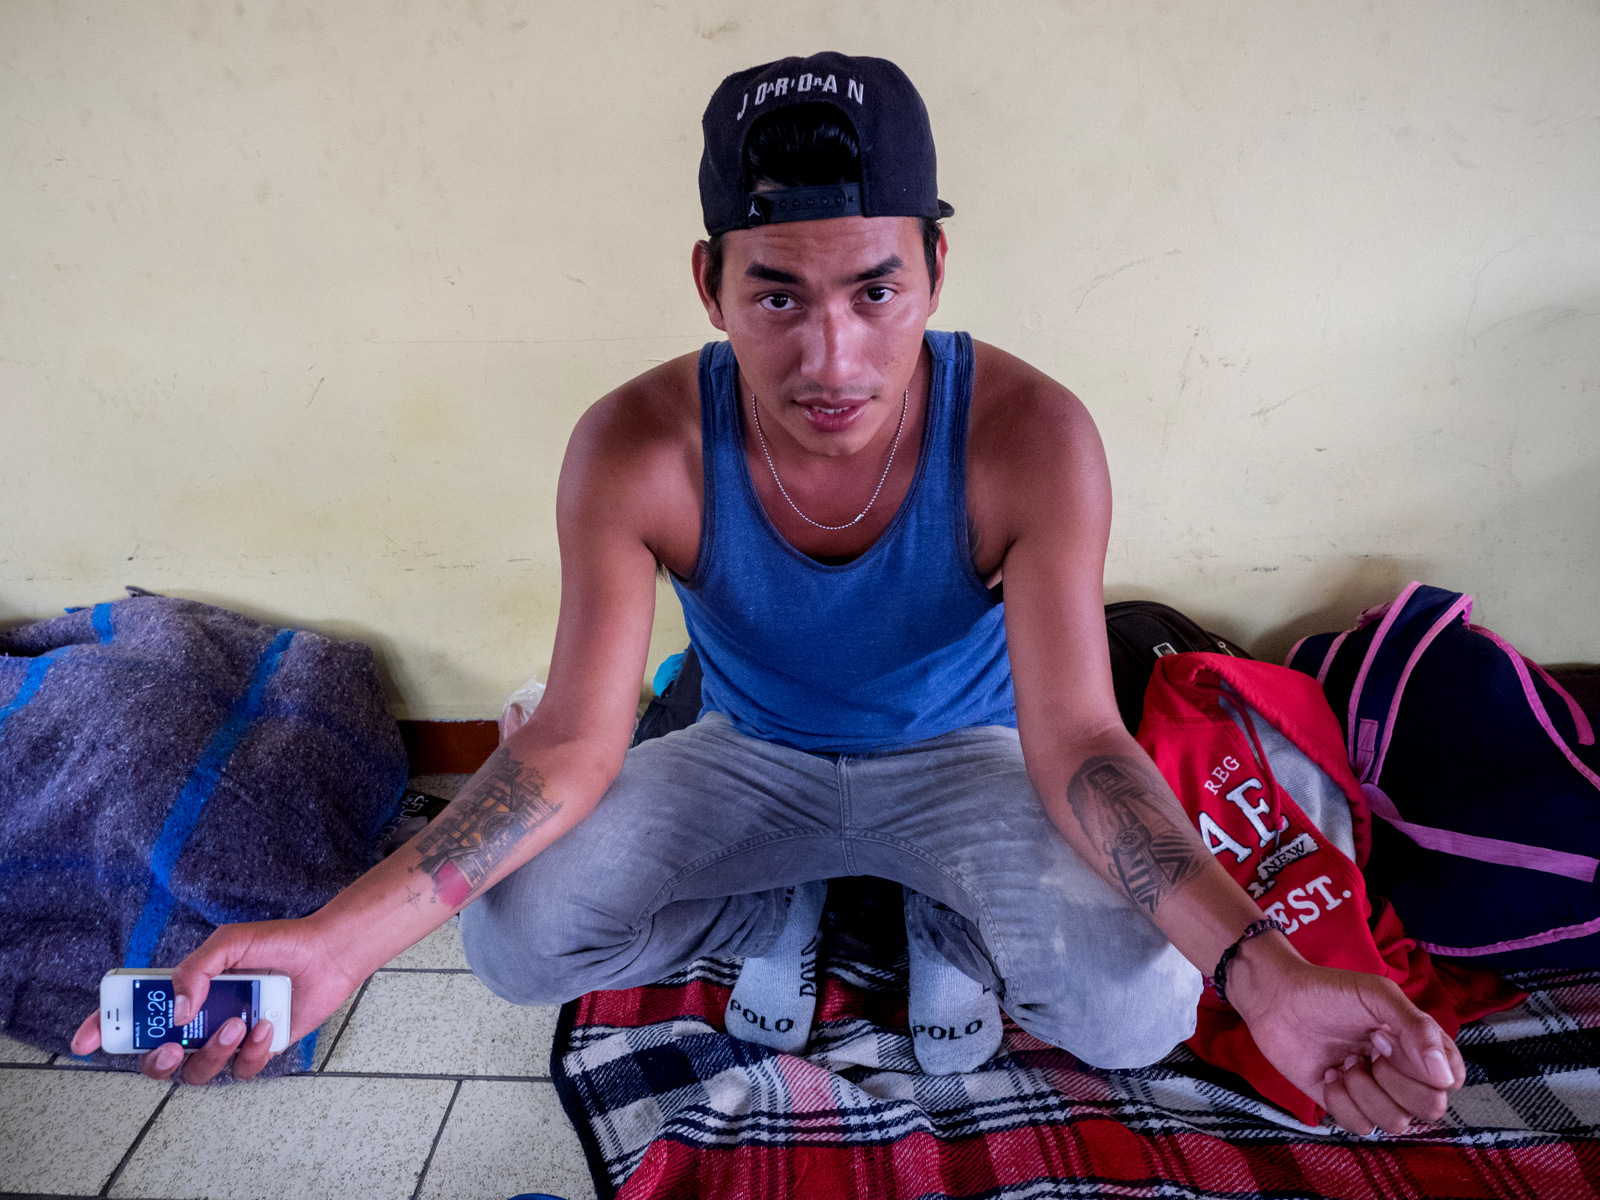 Inside the Casa del Peregrino, Israel Greñaldo, a migrant from Guatemala, shows off his tattoos, on his left arm he has an image of La Bestia, the freight train many migrants ride through Mexico as part of their journey to the United States, and on his right arm a tattoo depicting Antigua, Guatemala, April 10, 2018.